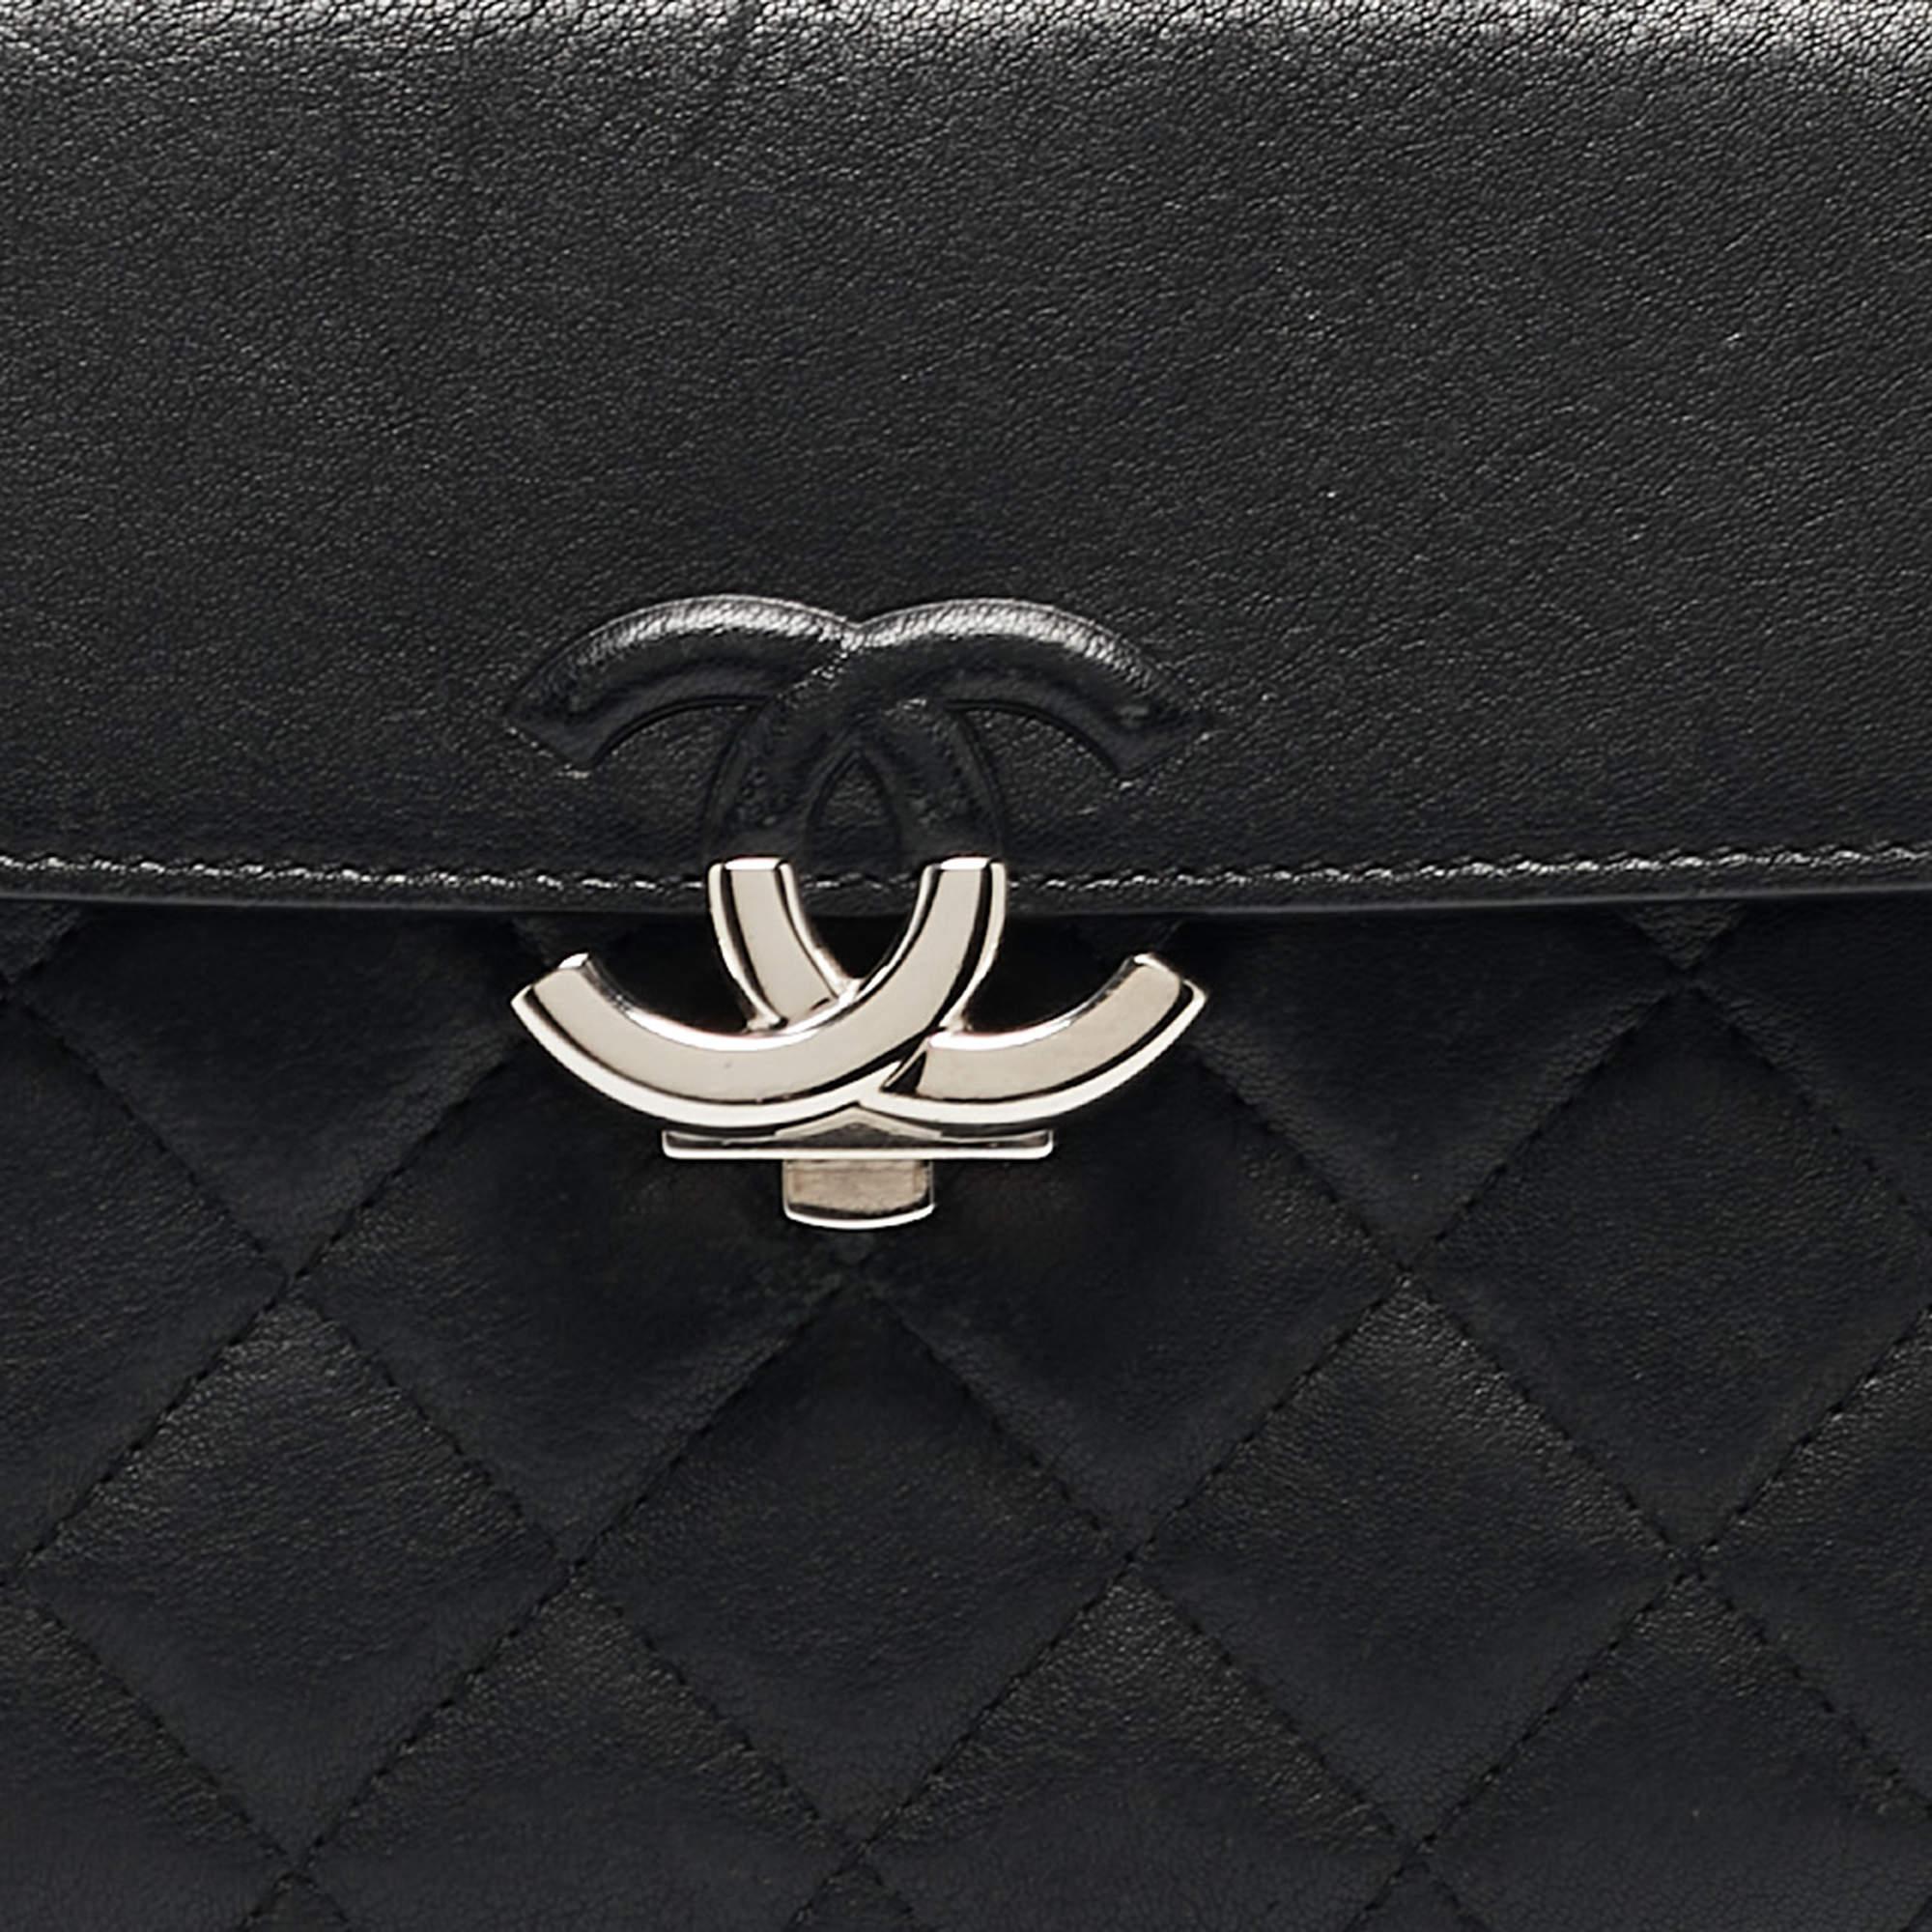 Chanel Black Quilted Leather Small CC Box Flap Bag For Sale 7